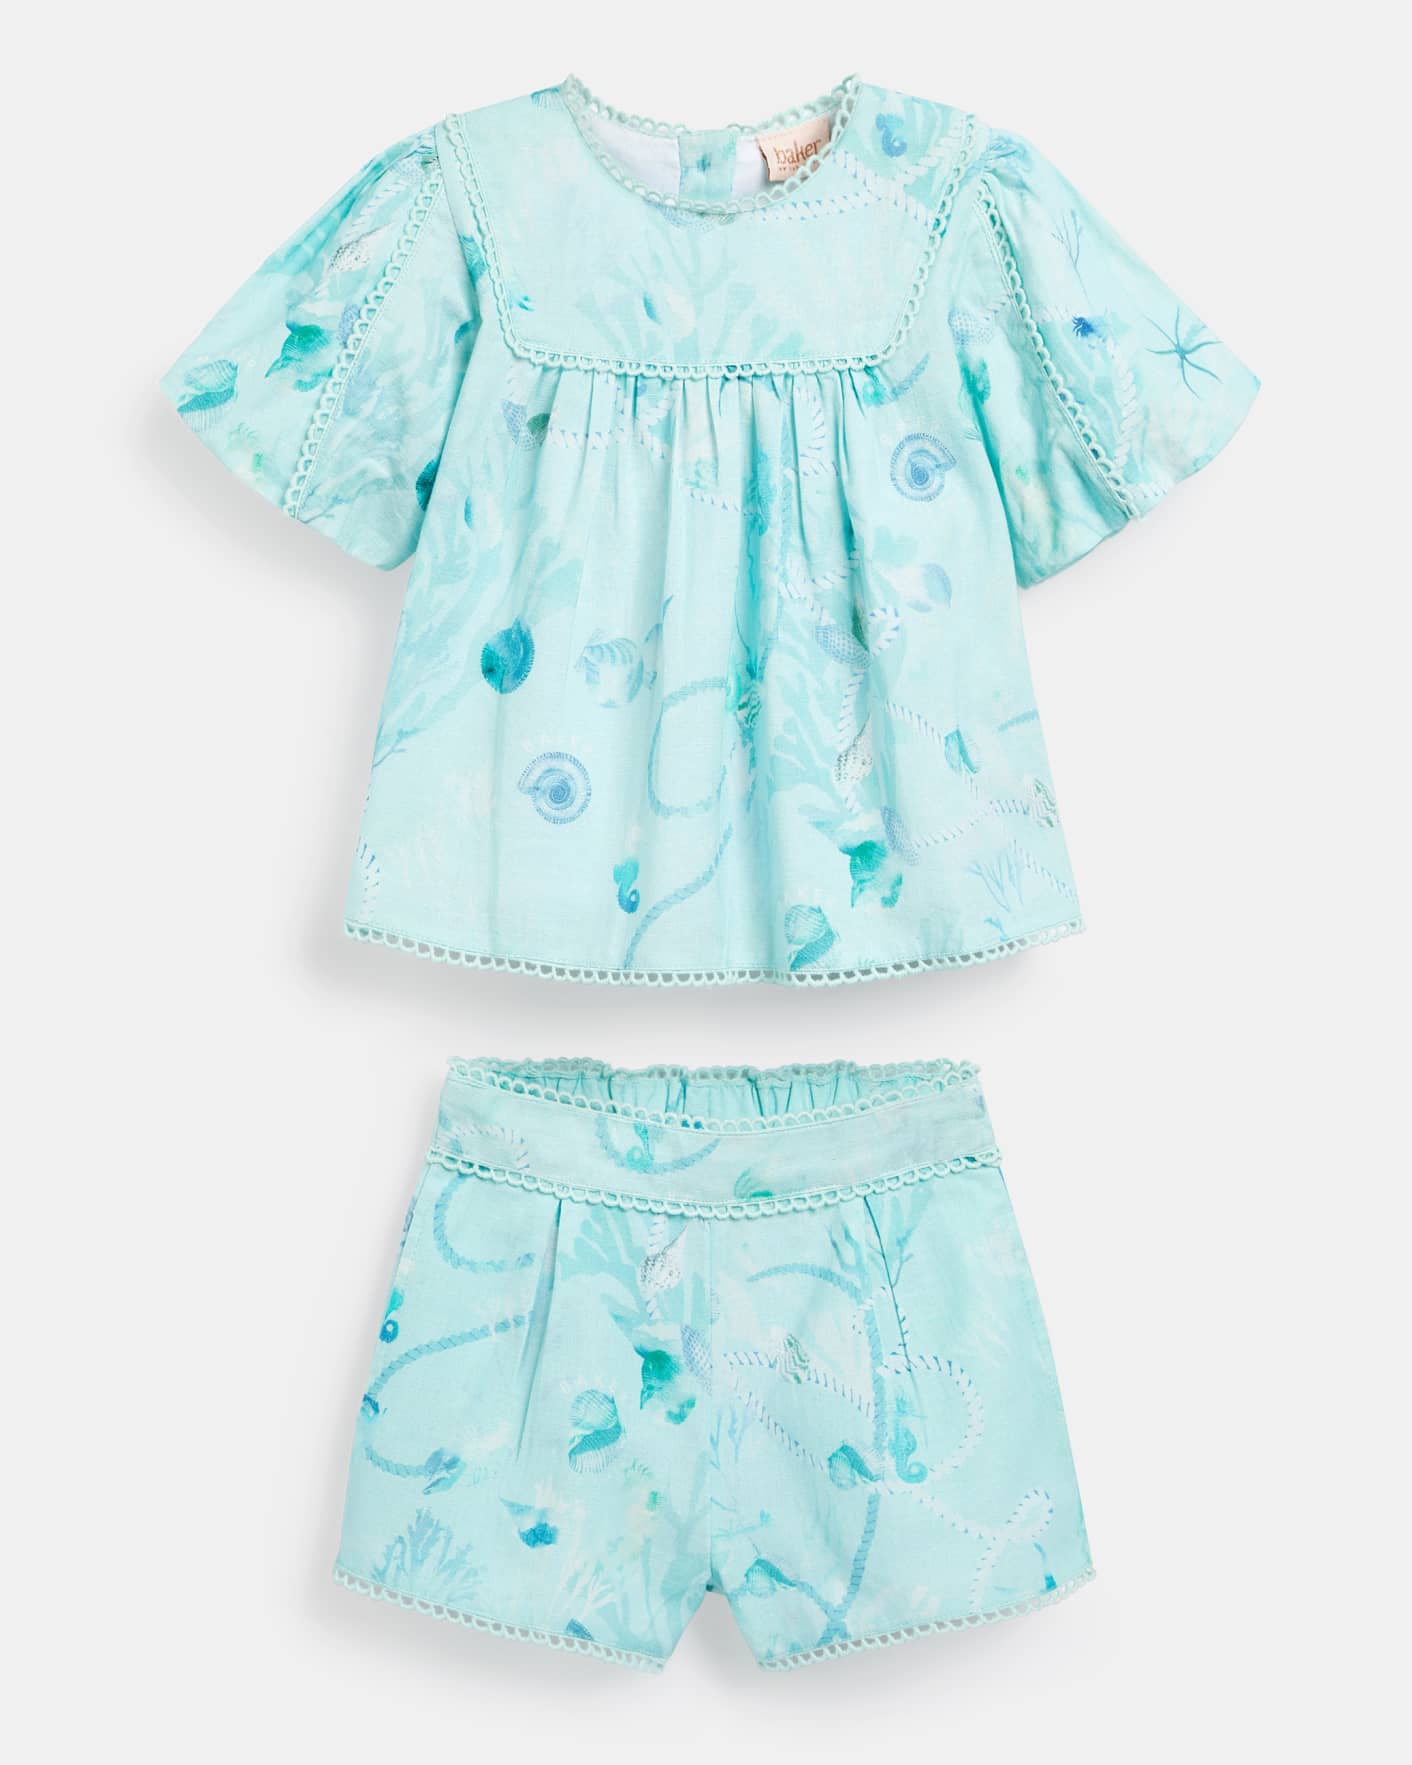 White Ocean Printed Top and Shorts Set Ted Baker